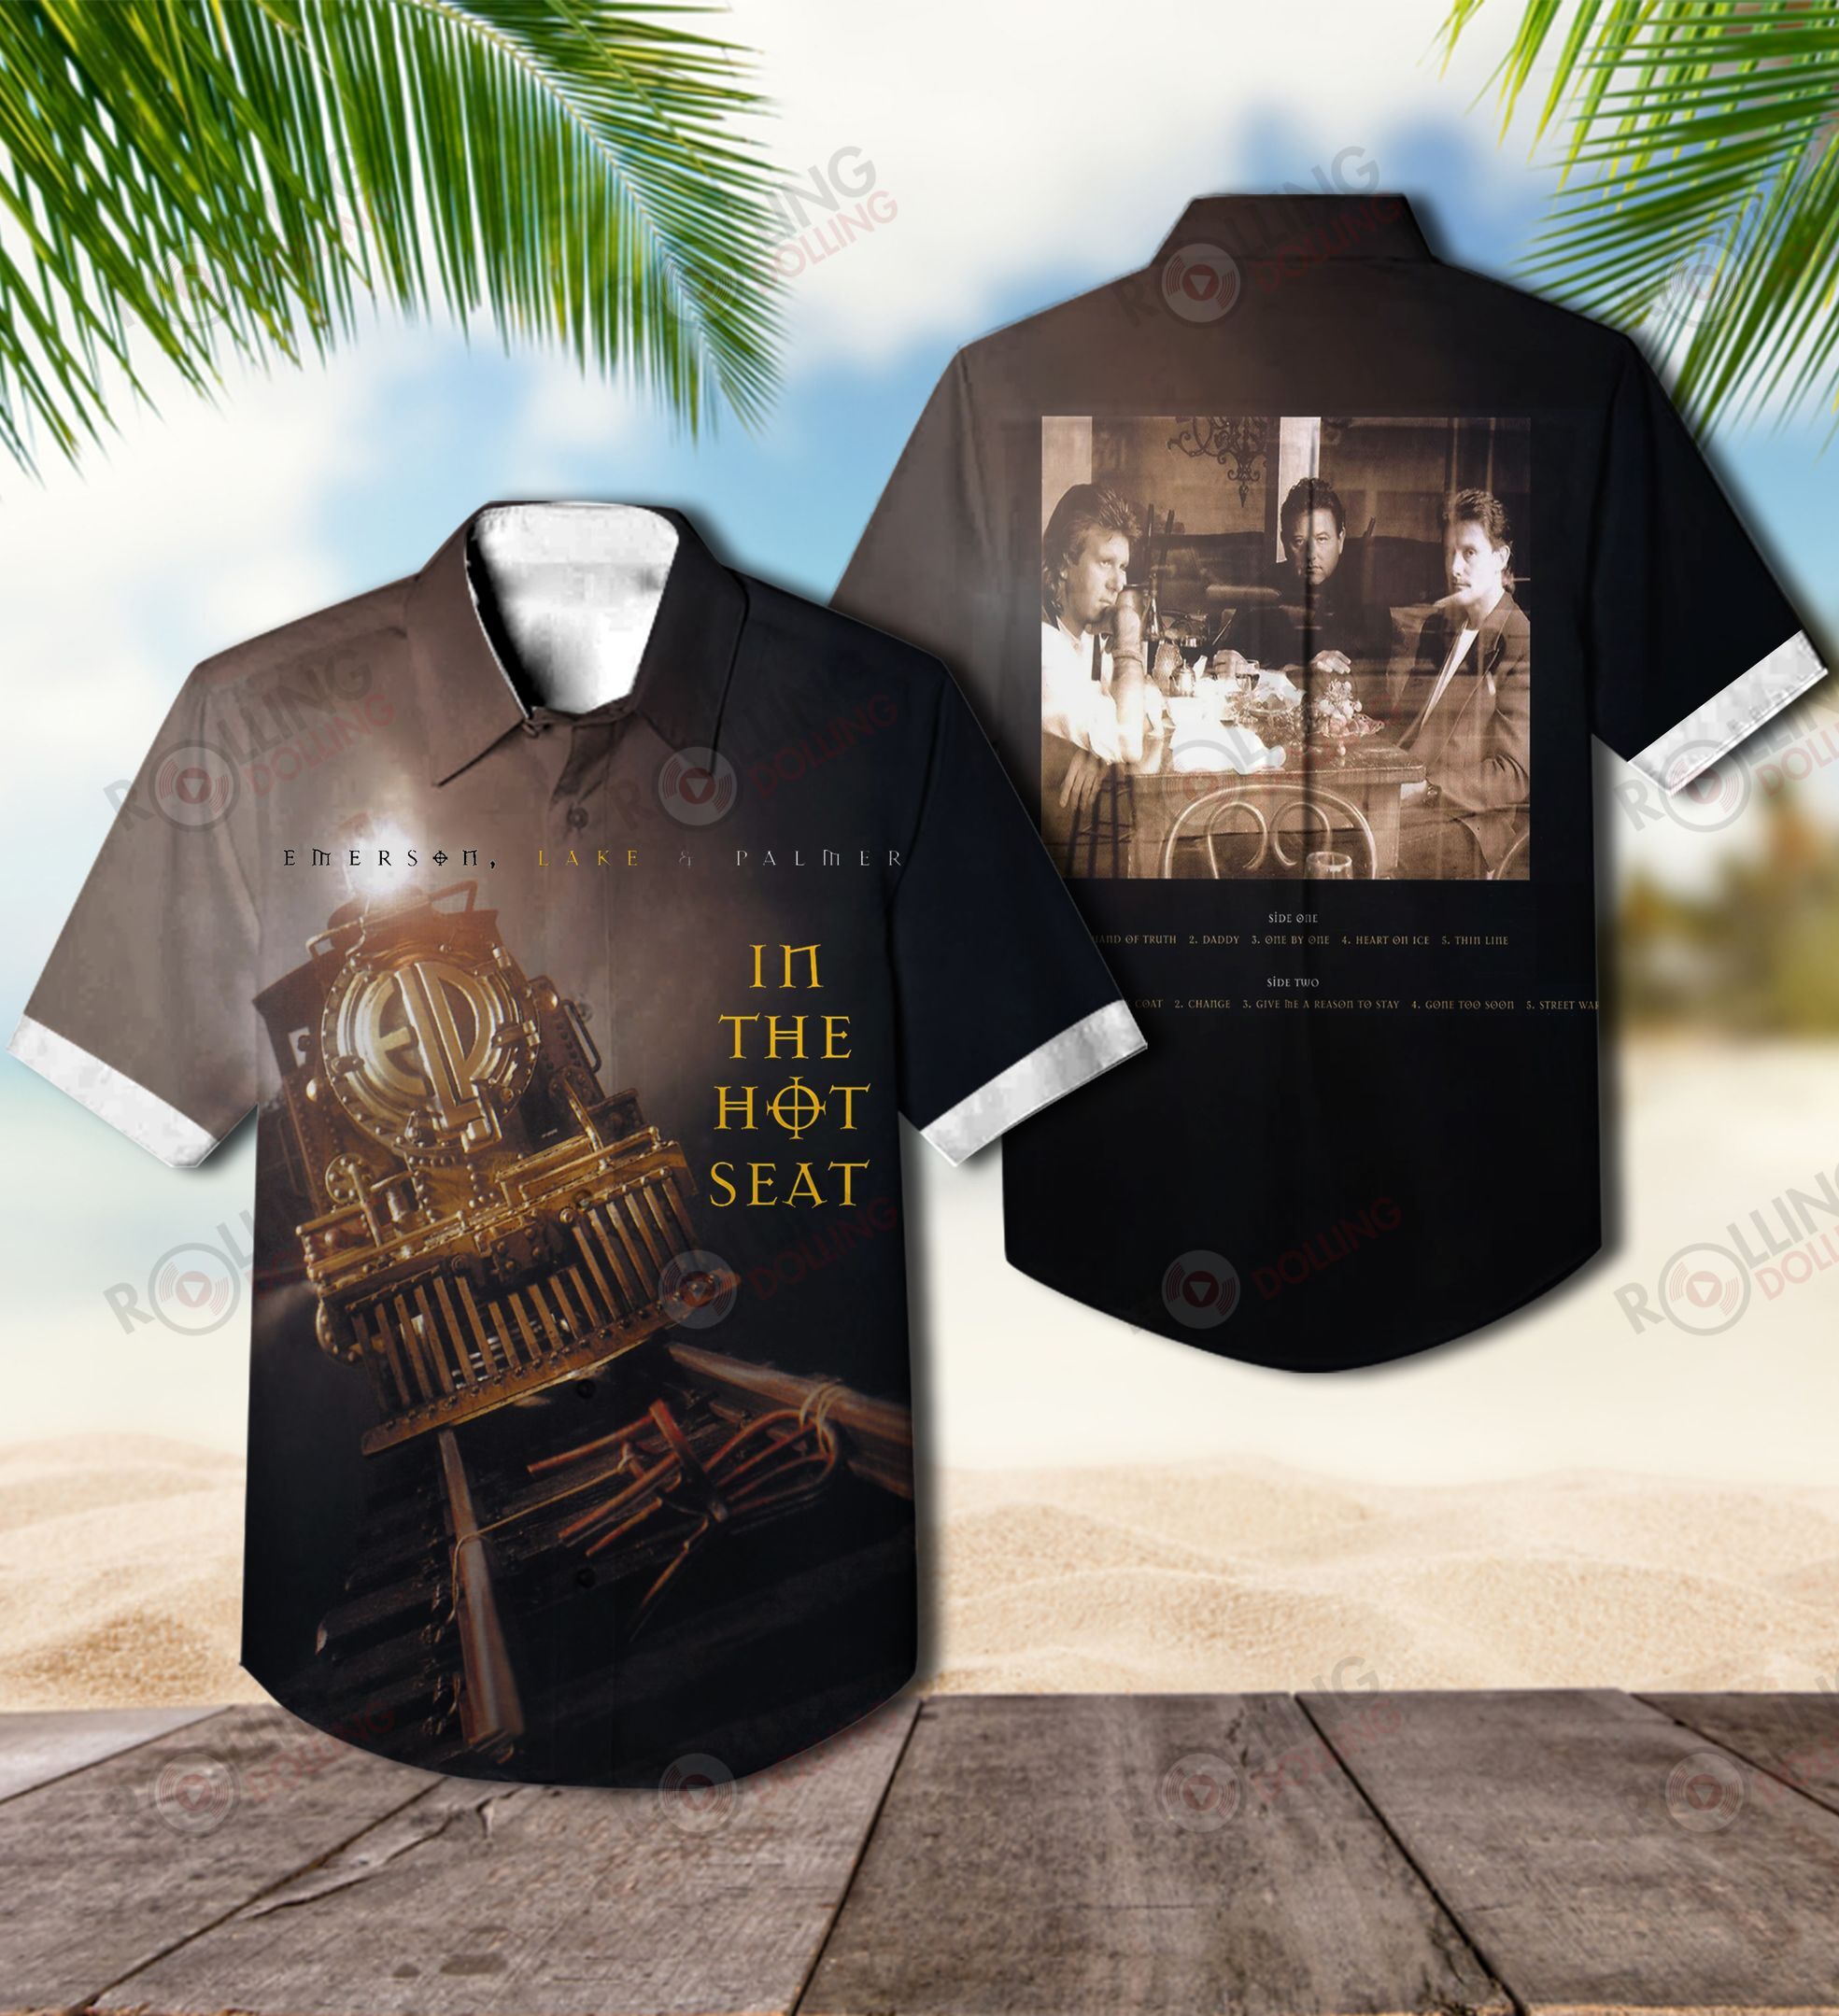 This would make a great gift for any fan who loves Hawaiian Shirt as well as Rock band 54